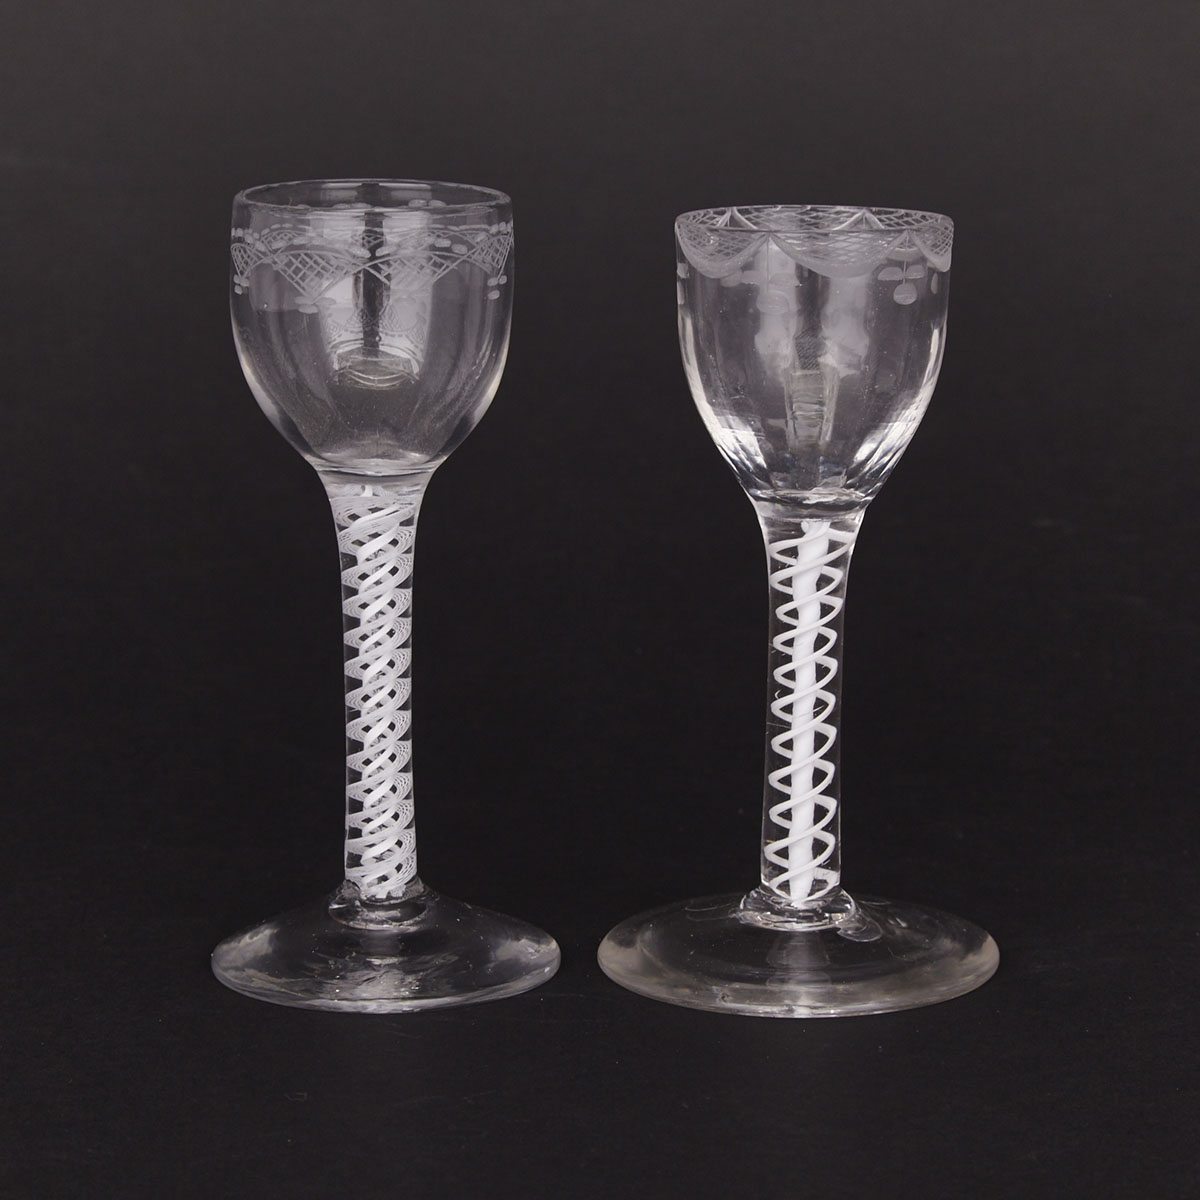 Two English Opaque Twist Engraved Wine Glasses, 18th century